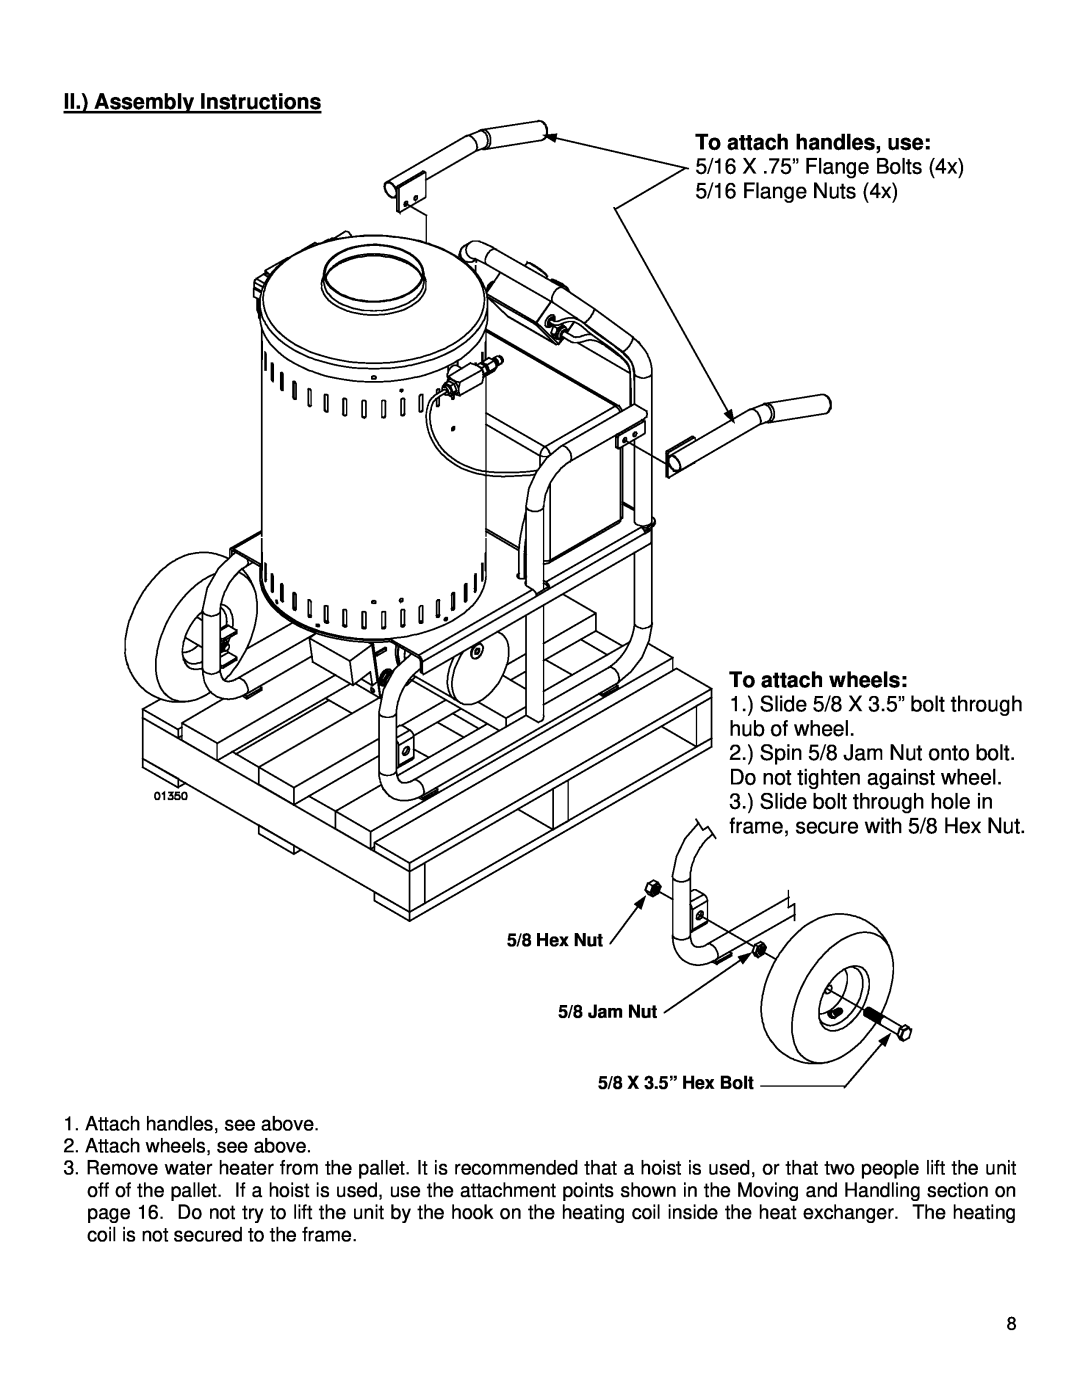 Northern Industrial Tools 157494 specifications II. Assembly Instructions, To attach wheels 